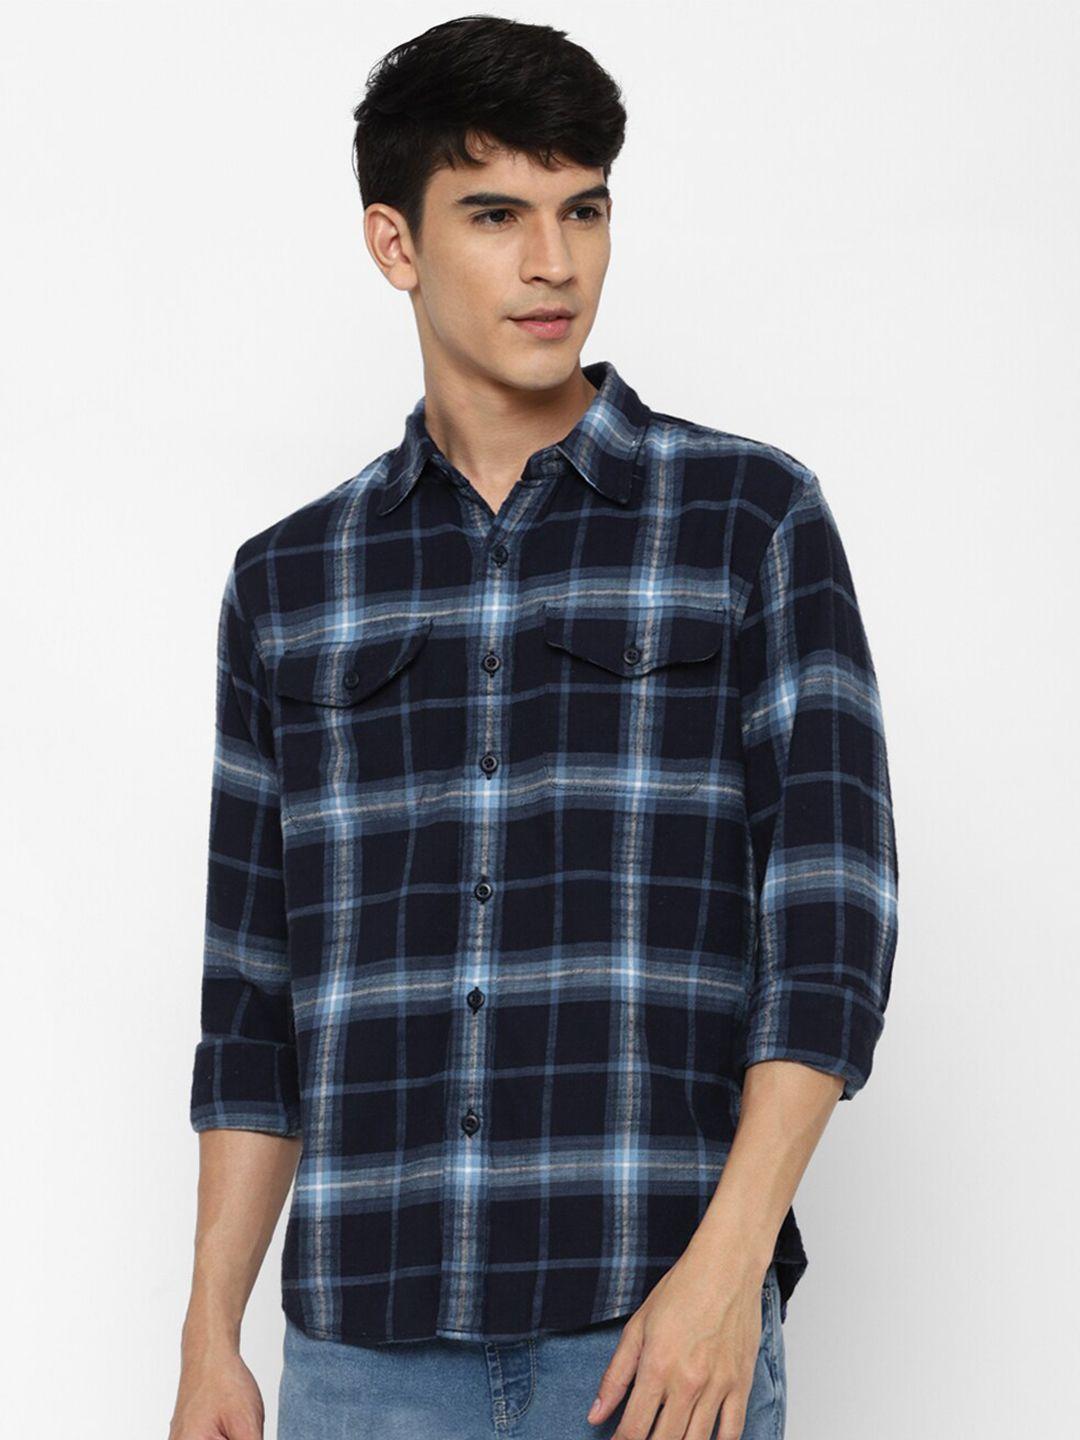 american eagle outfitters men navy blue tartan checked pure cotton casual shirt